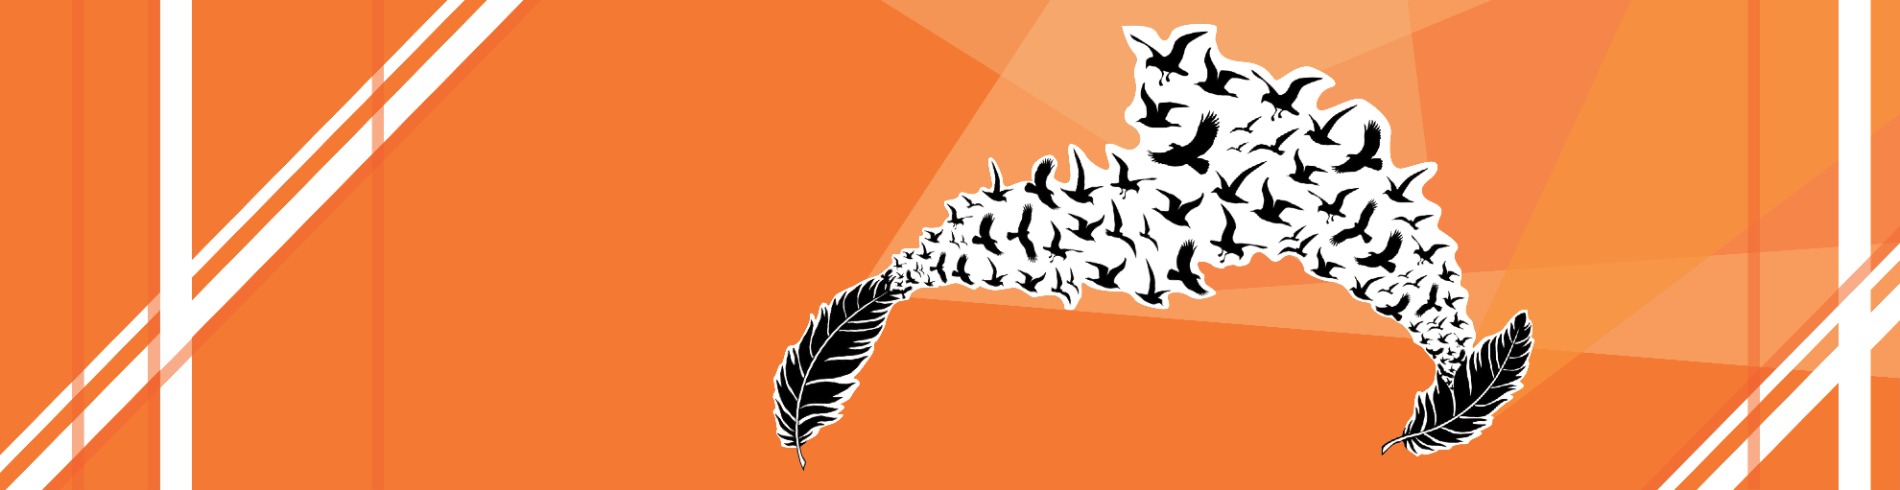 Orange background with bird silhouettes flying out of two feathers